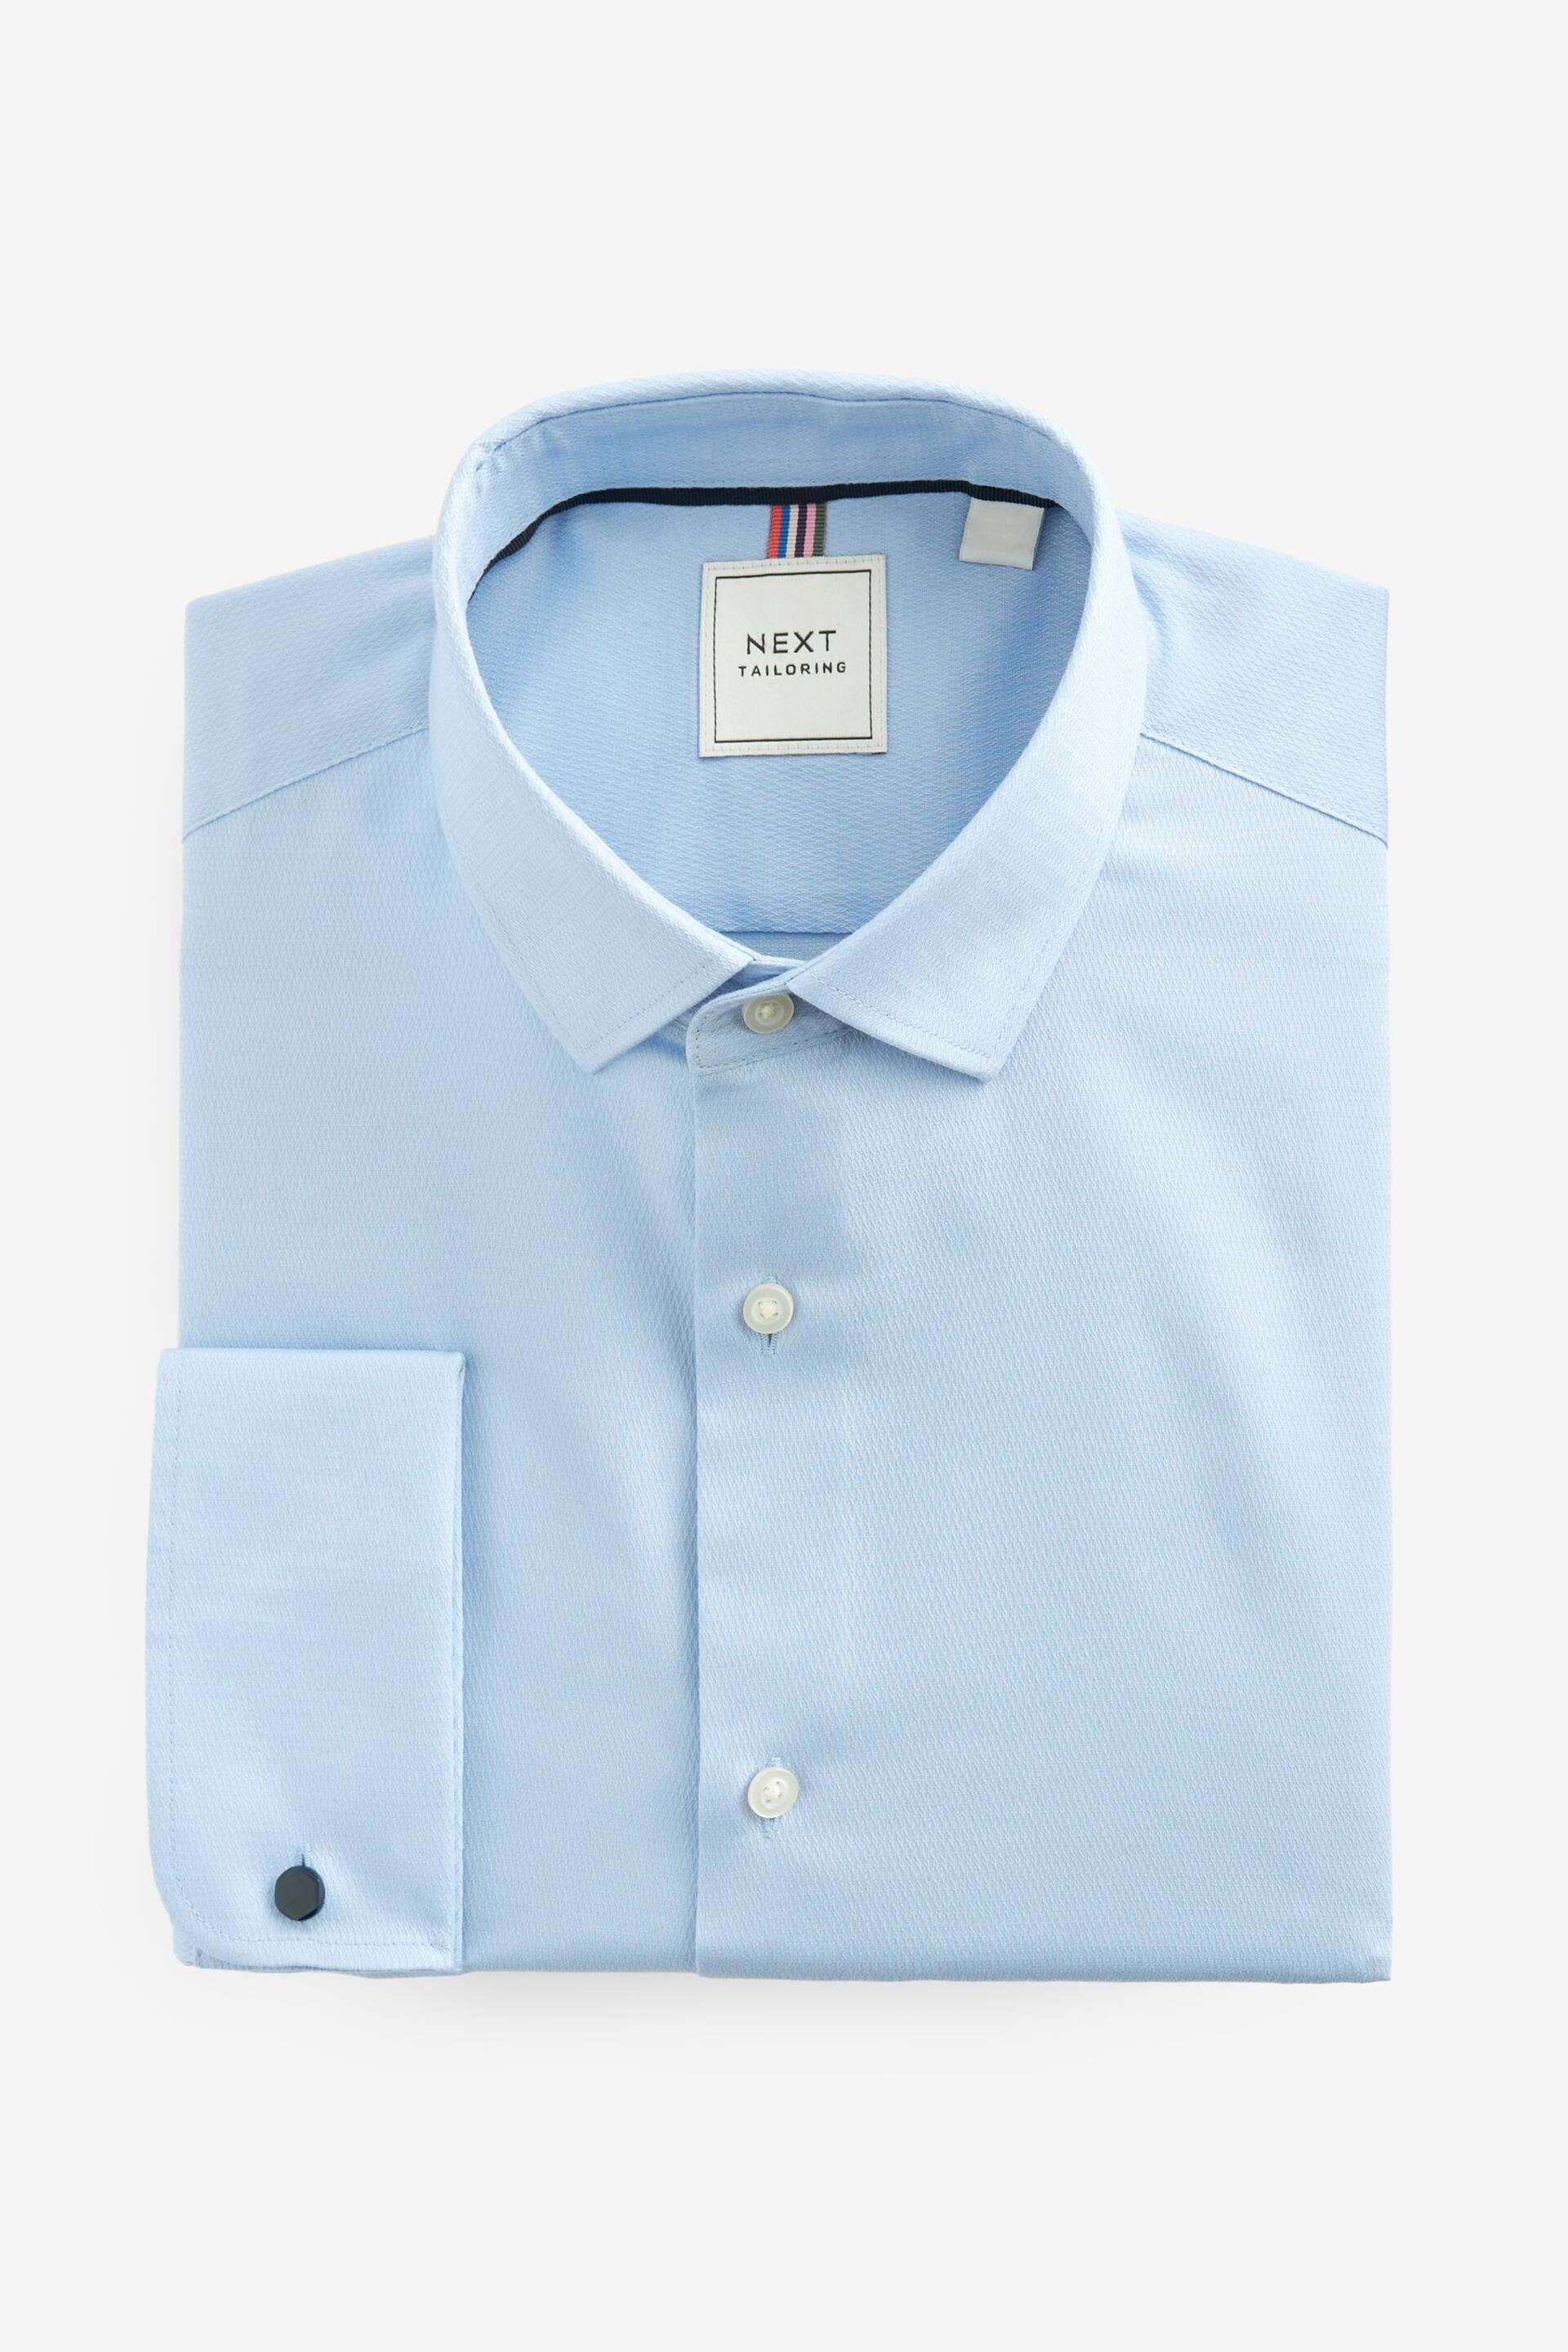 Blue Slim Fit Double Cuff Easy Care Textured Shirt - Image 7 of 8